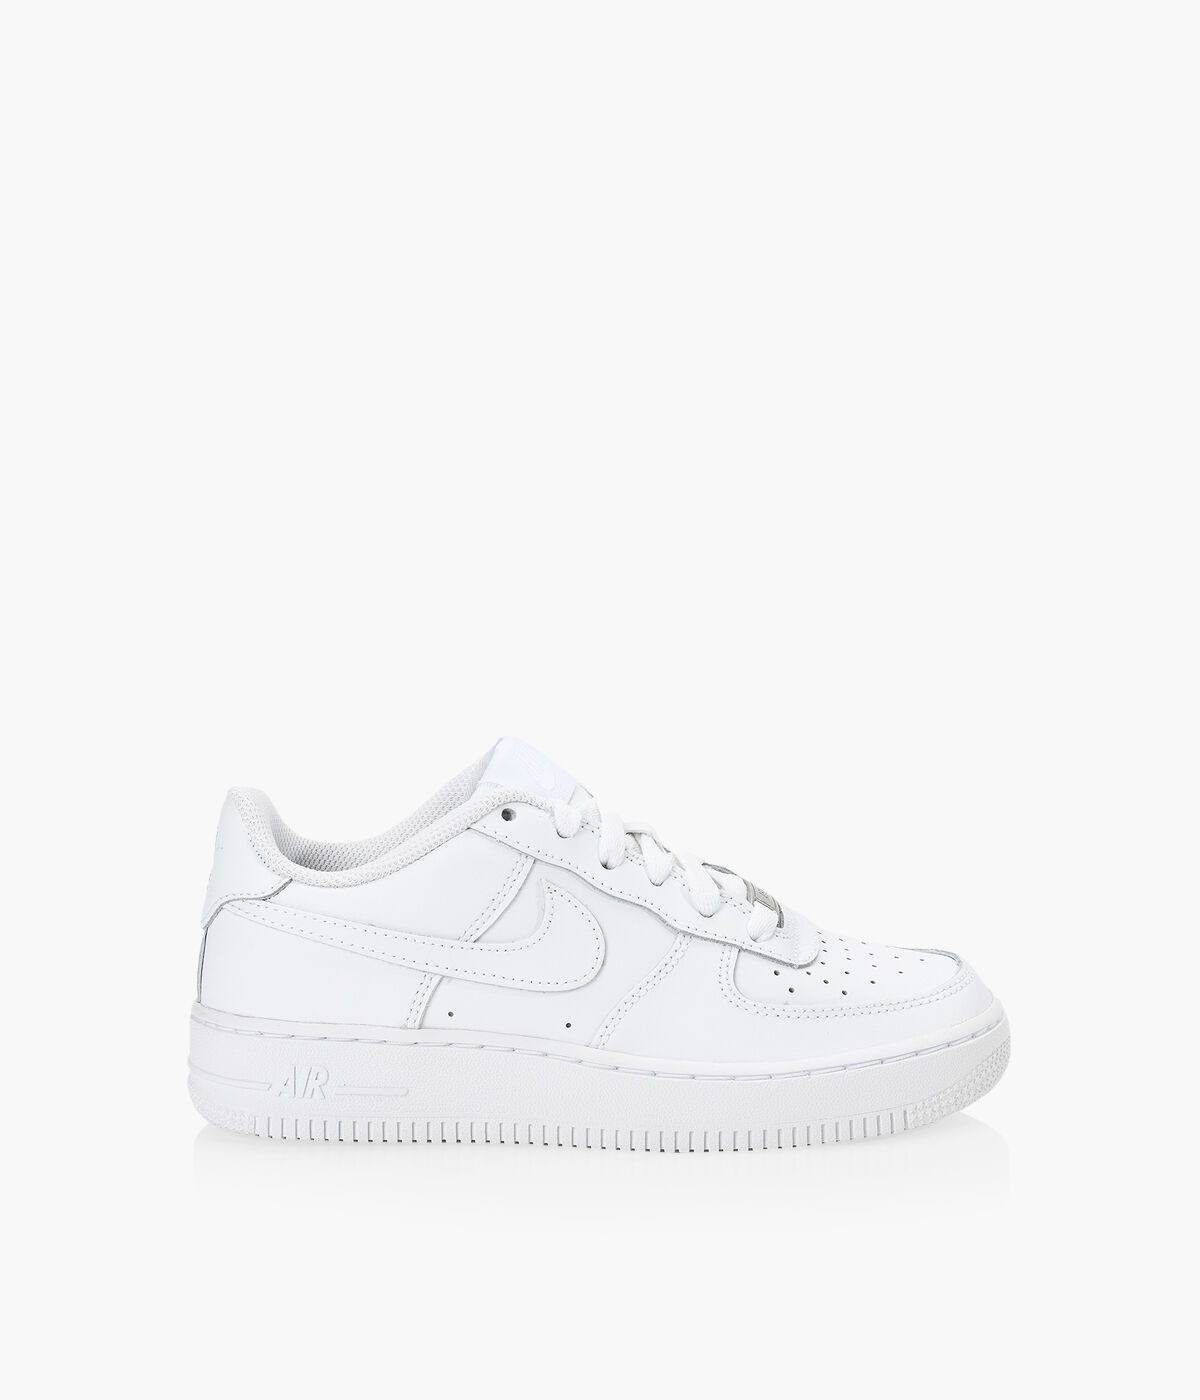 air force white and black womens